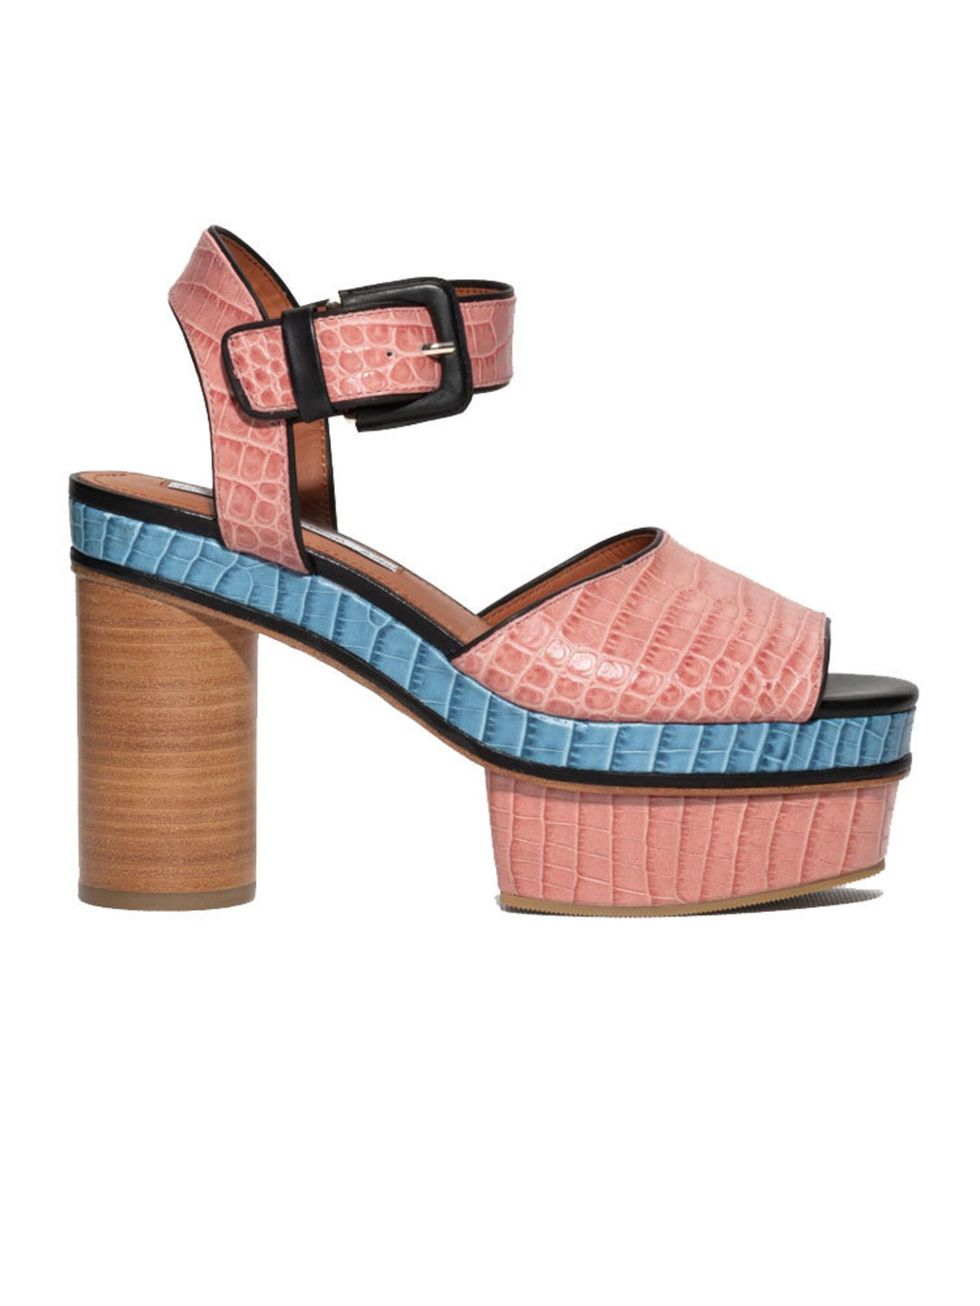 <p><a href="http://www.stories.com/gb/Shoes/All_shoes/Embossed_Leather_Platform_Sandals/590763-114042749.1" target="_blank">& Other Stories</a> shoes, £125</p>